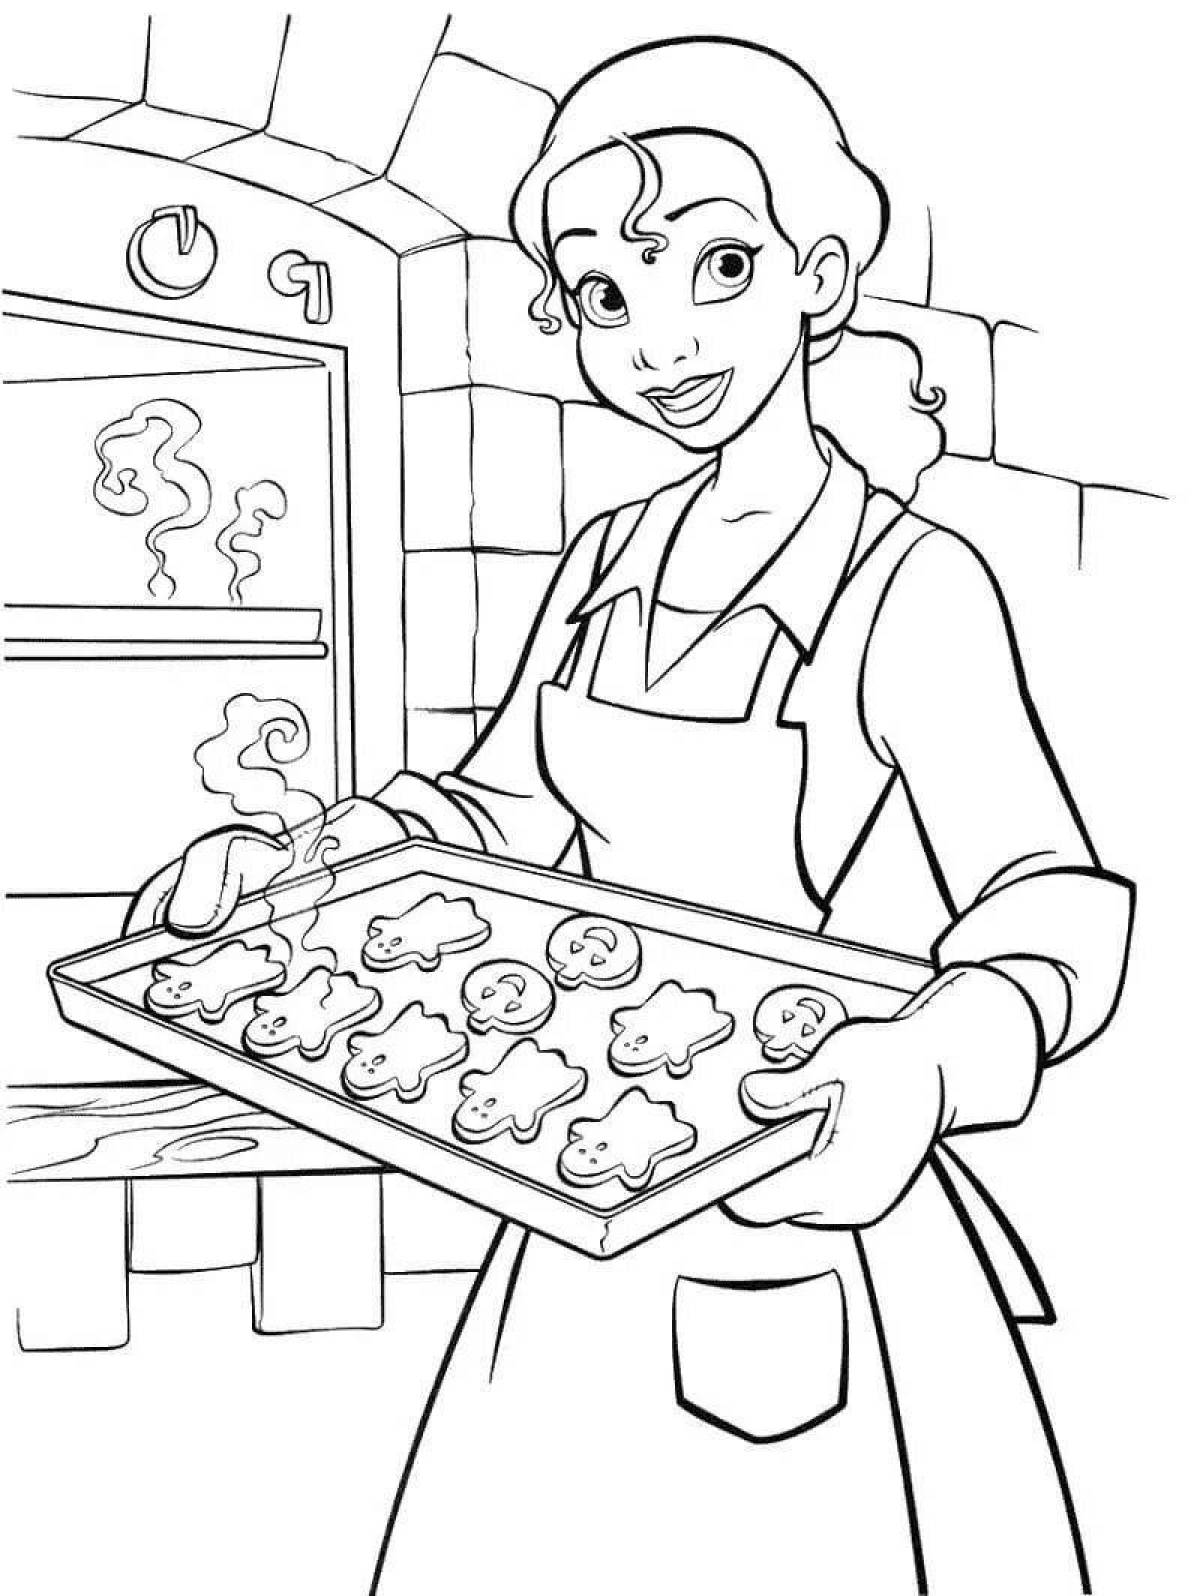 A fun pastry chef coloring book for kids